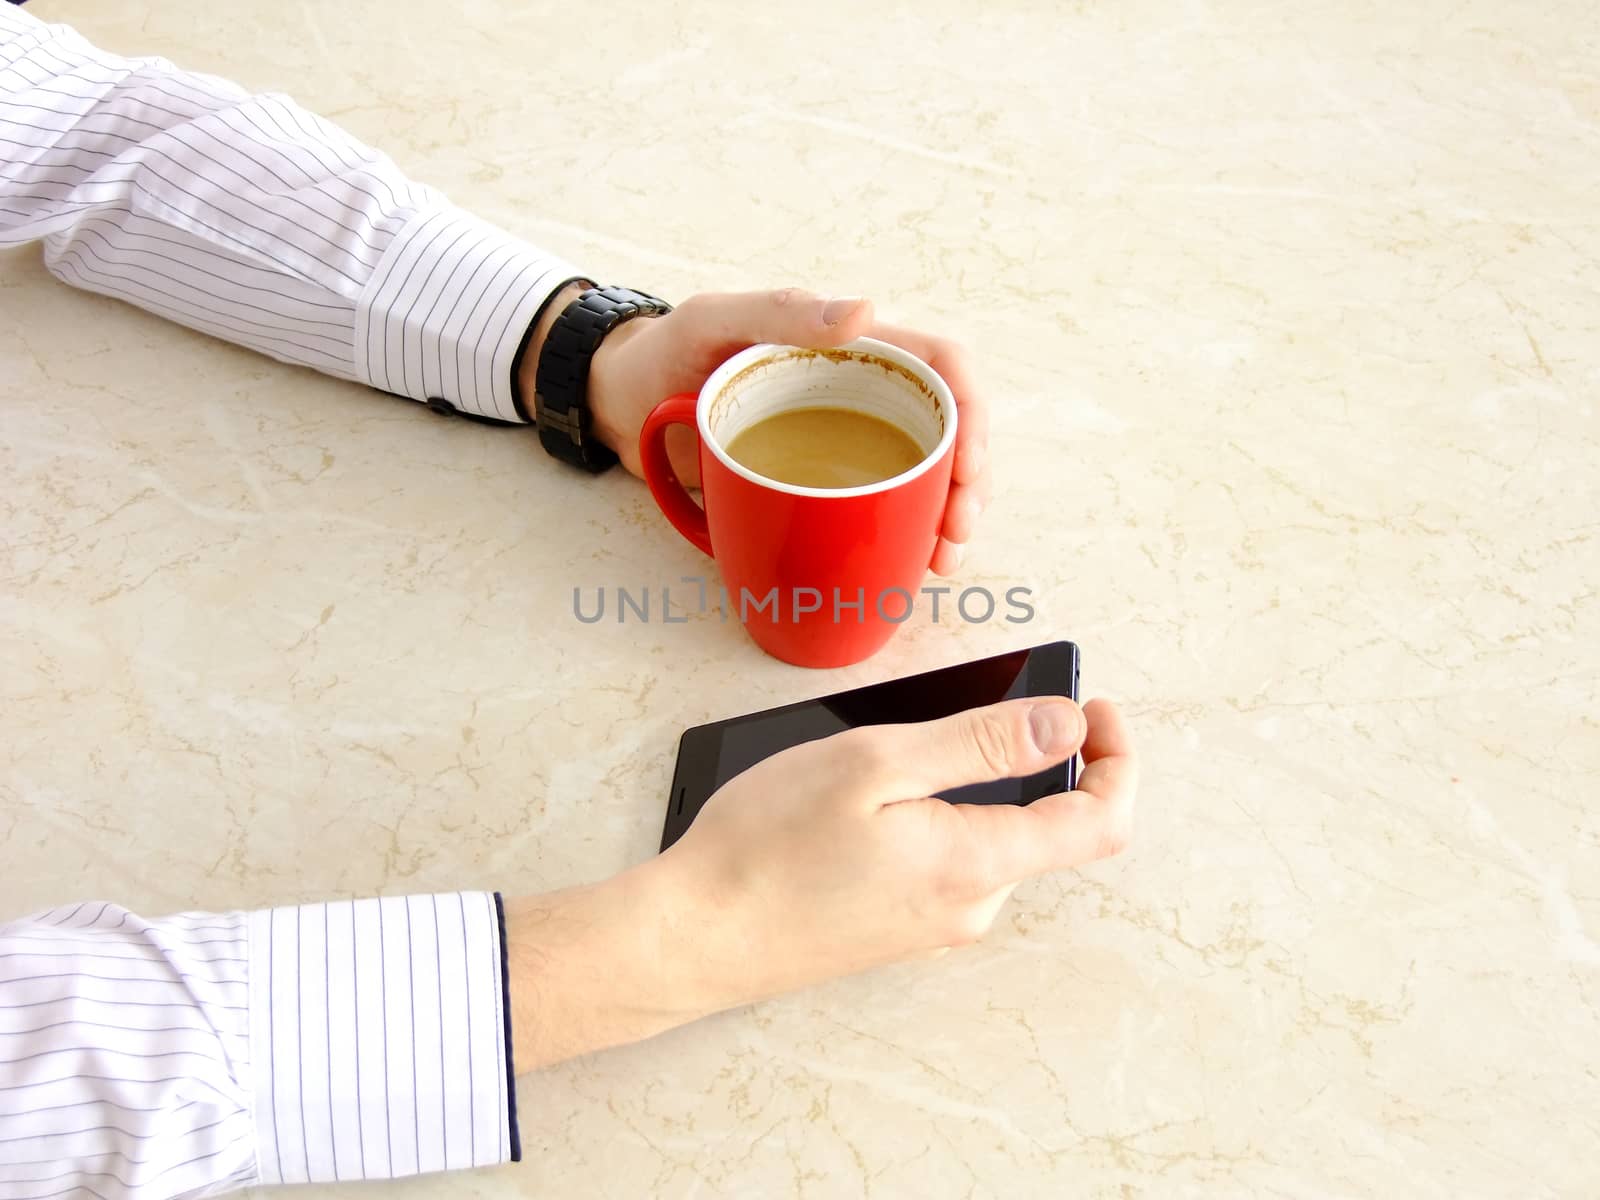 Business man using his Cellphone while holding Coffee in a red Cup